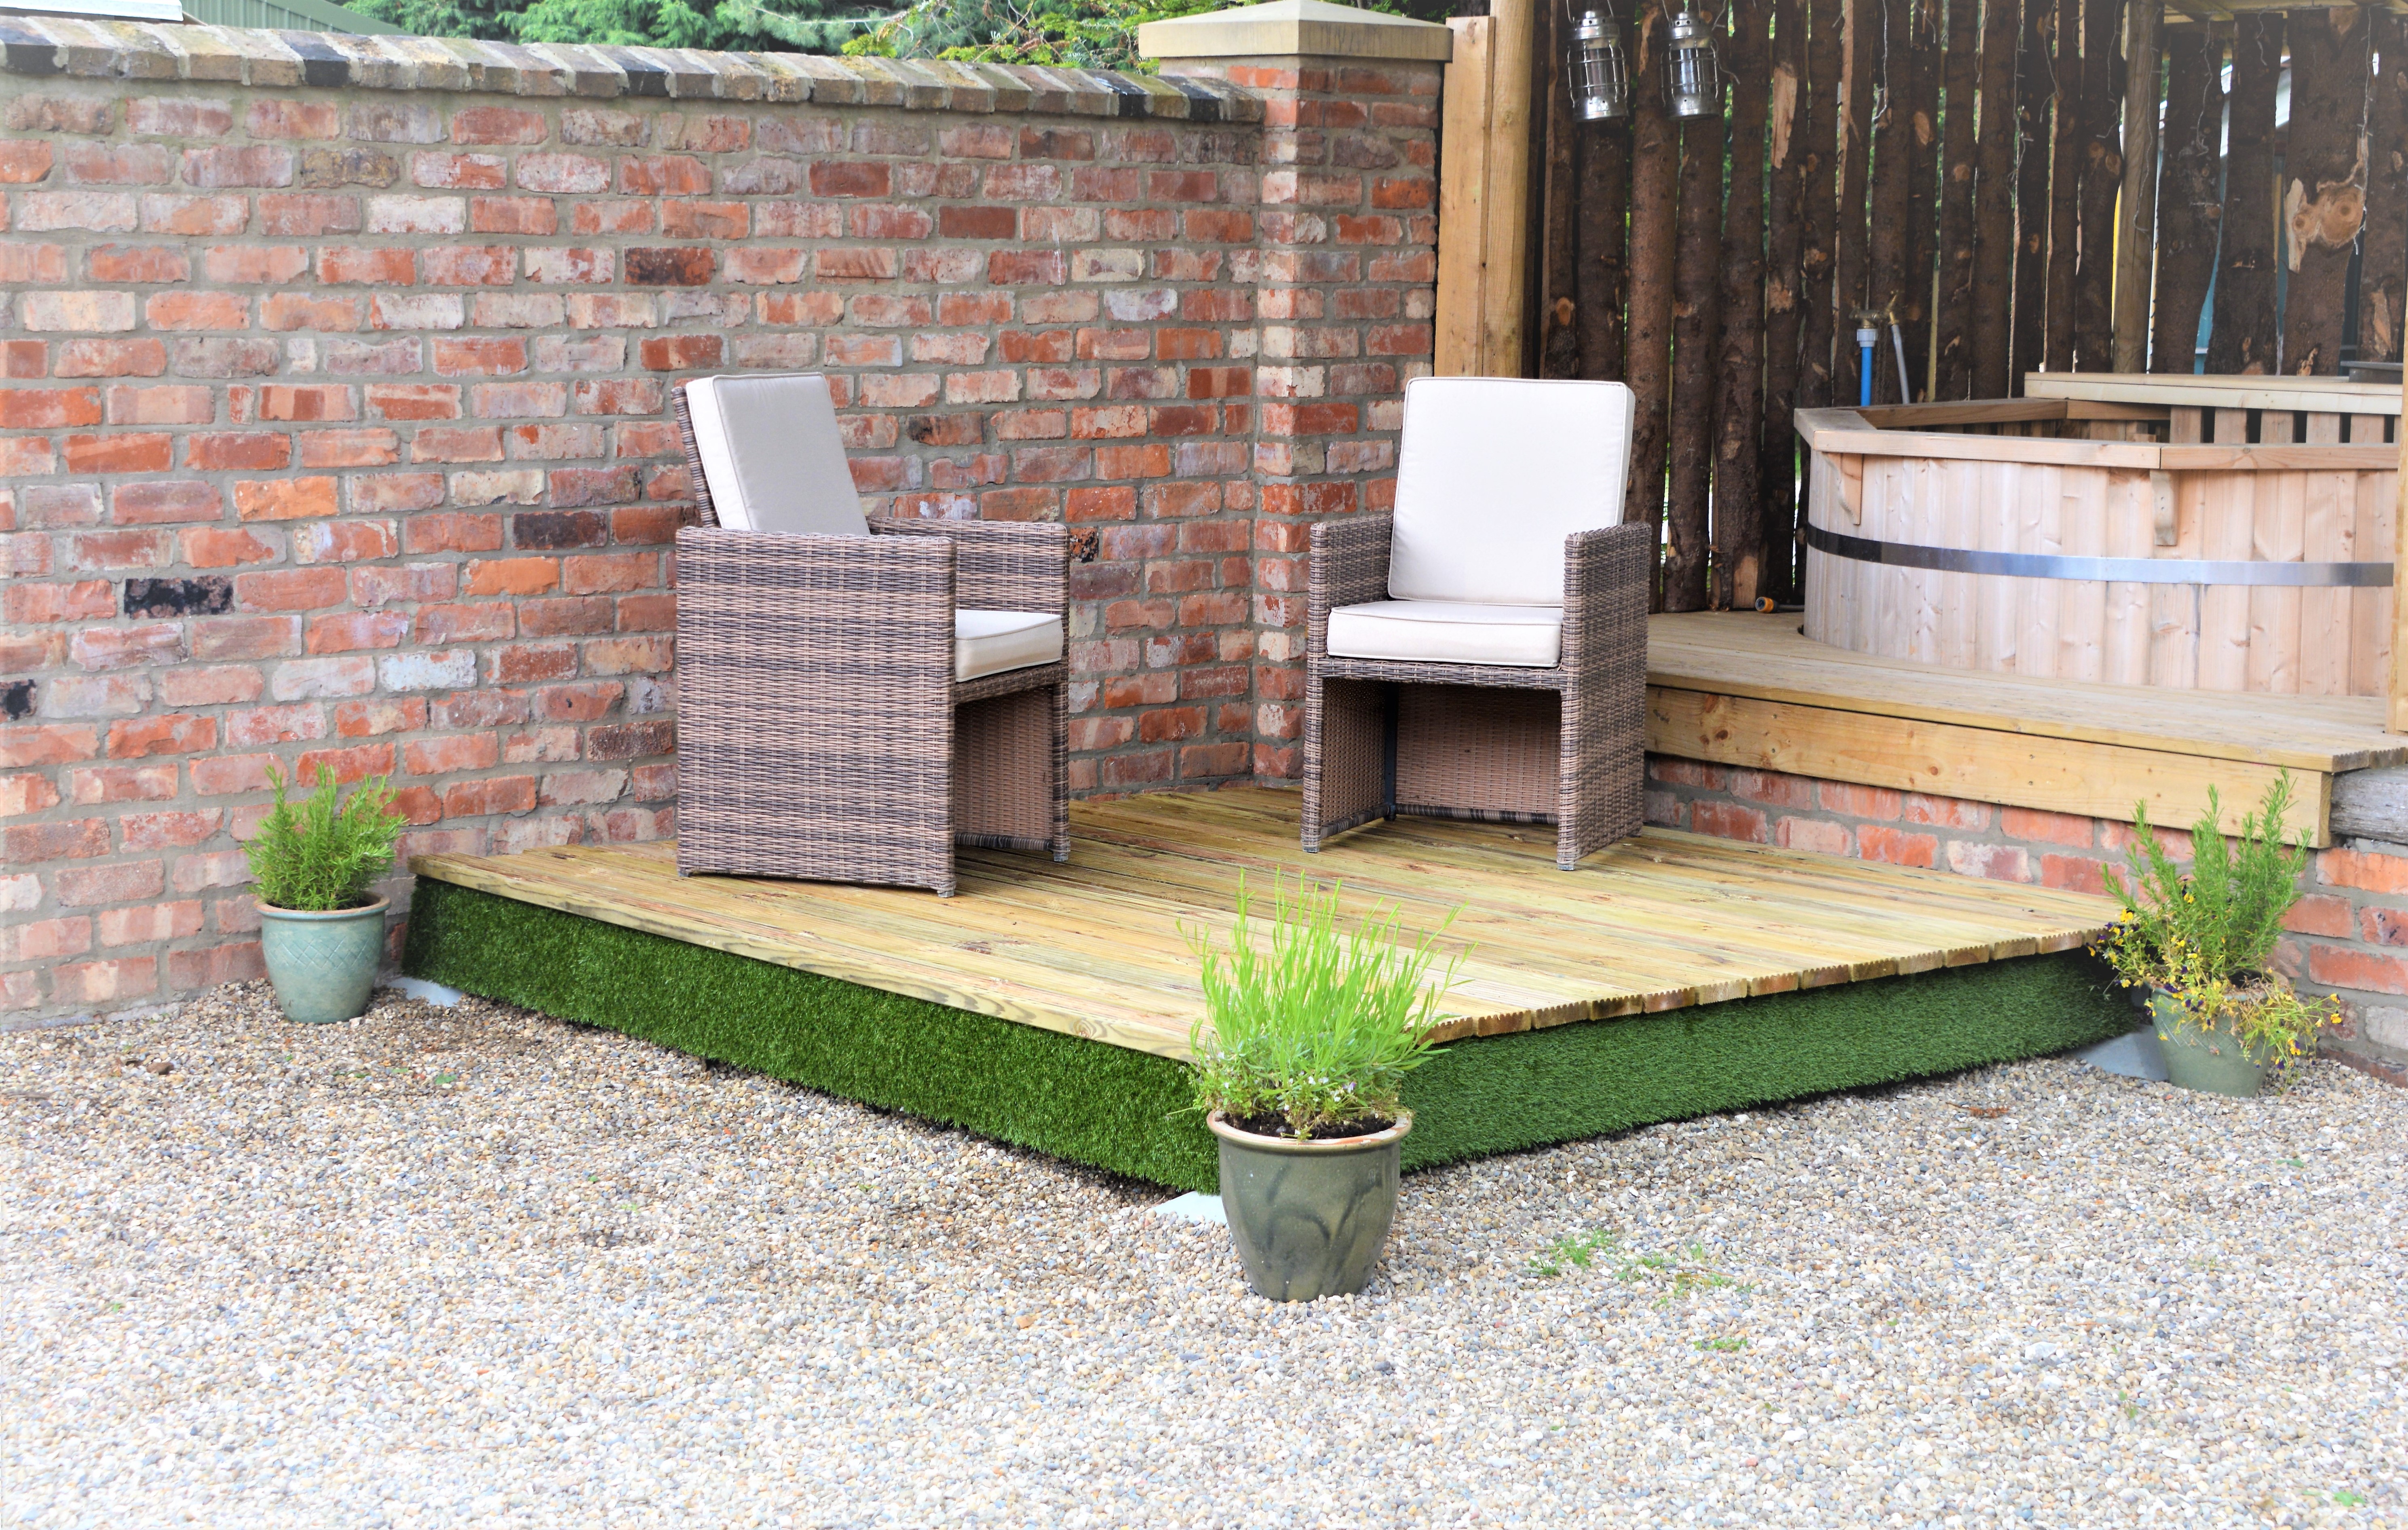 Image of Swift Deck Self-Assembly Garden Decking Kit With Adjustable Foundations - 4.75 x 4.7m